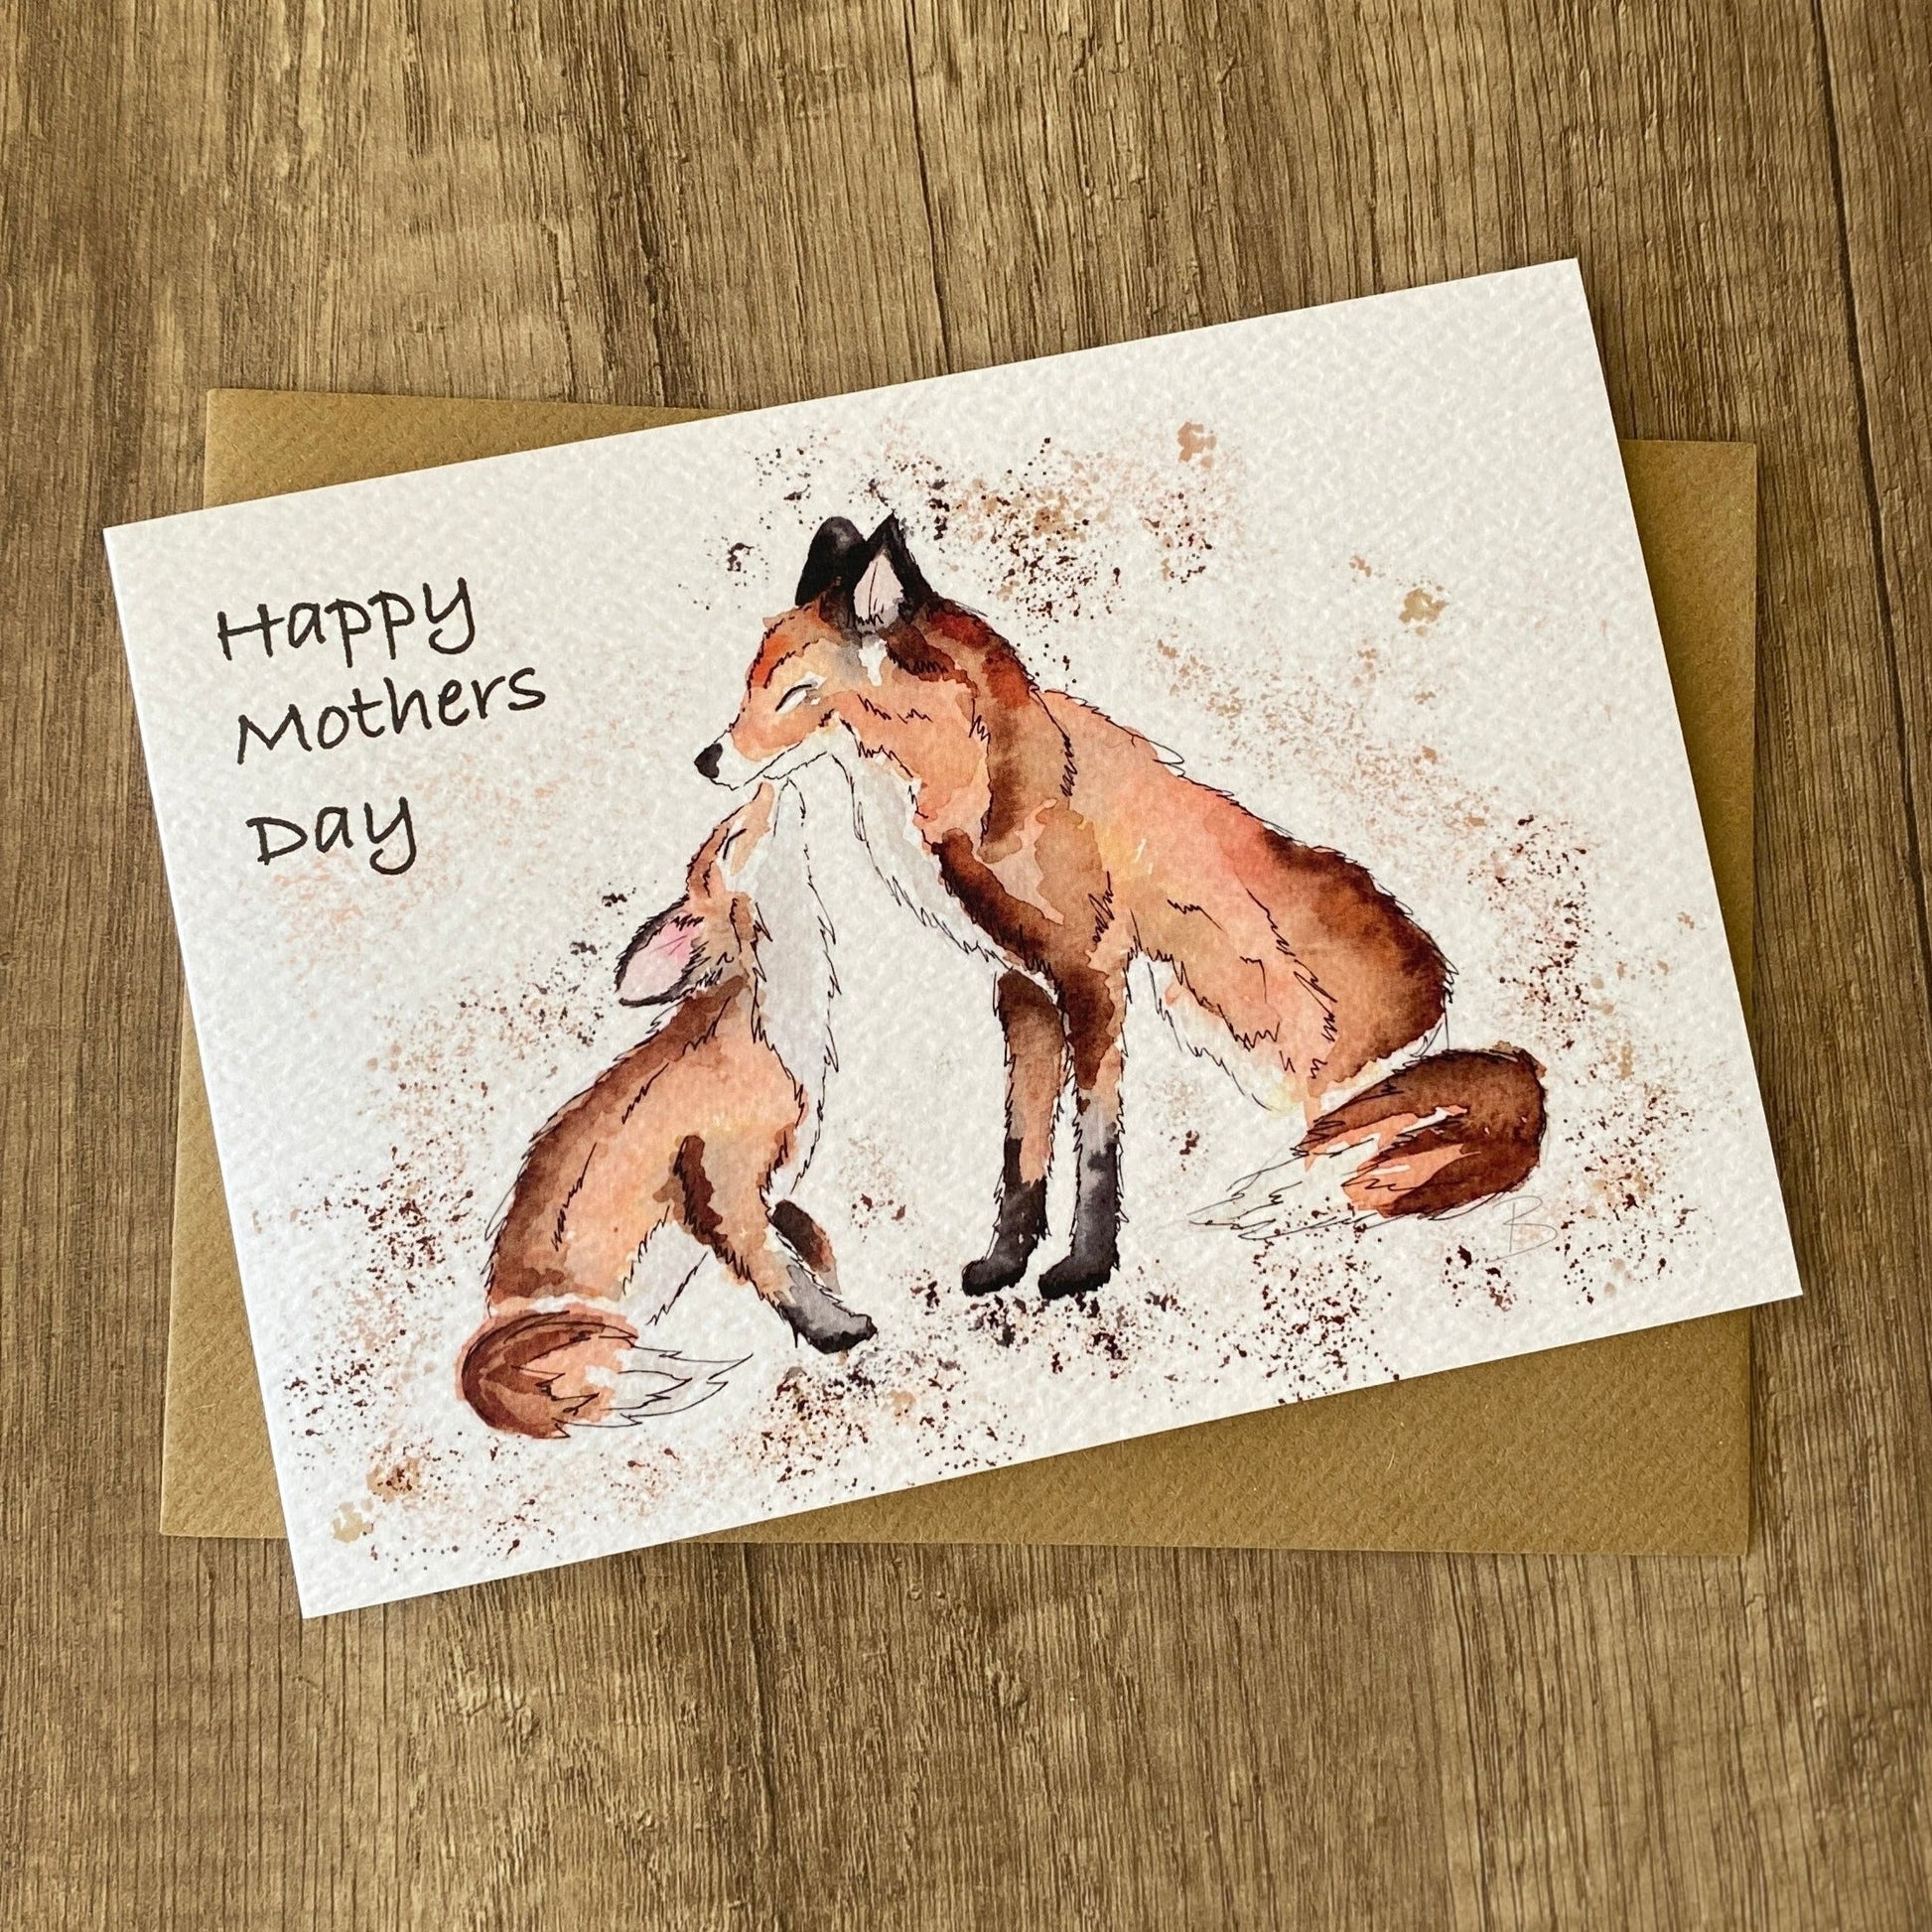 Happy mothers day fox and cub greetings card